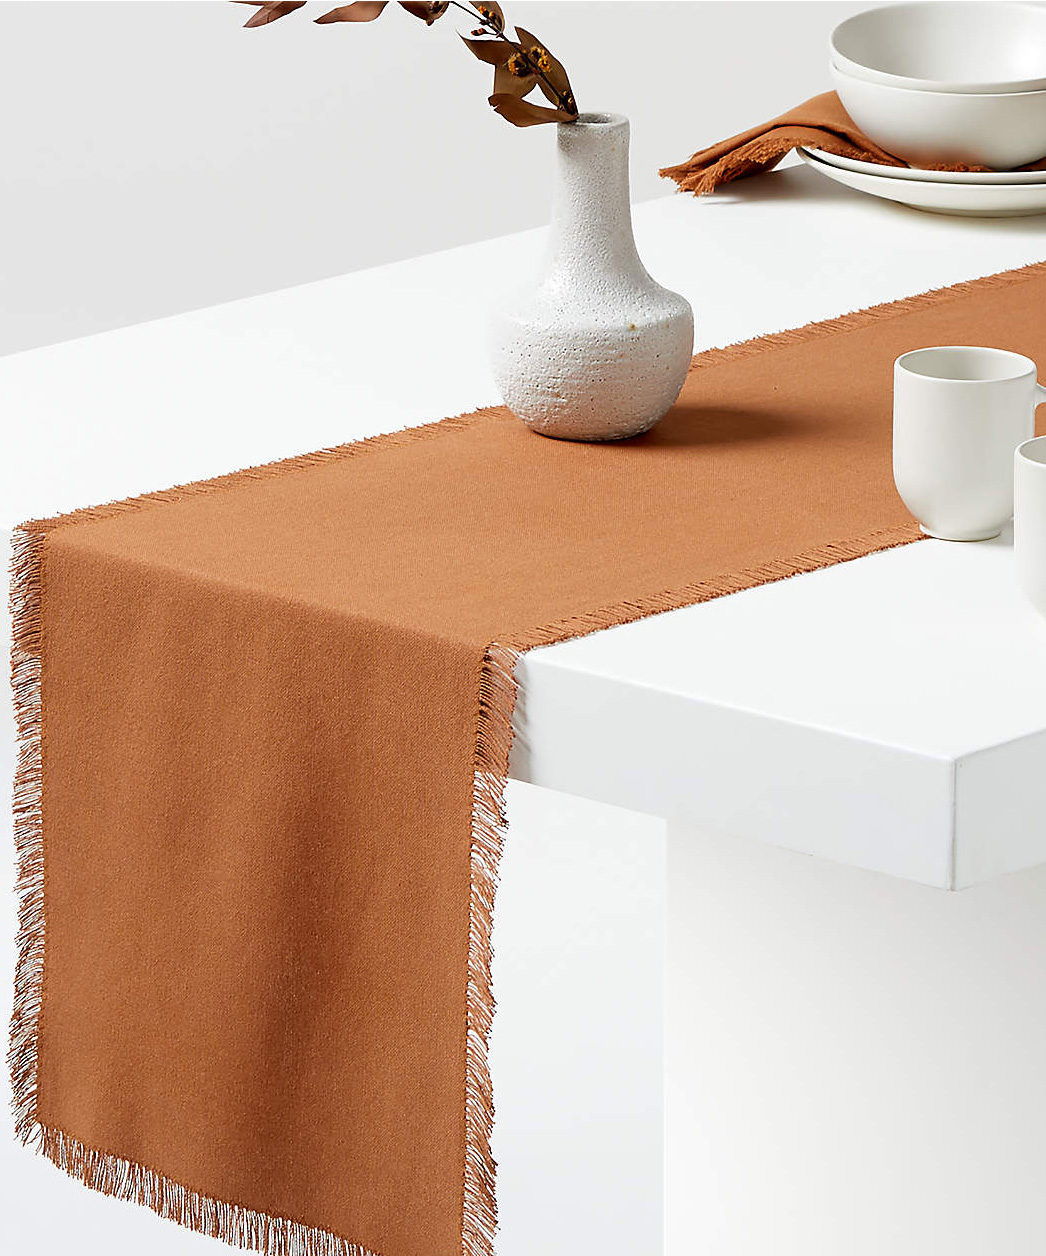 crate and barrel table runner